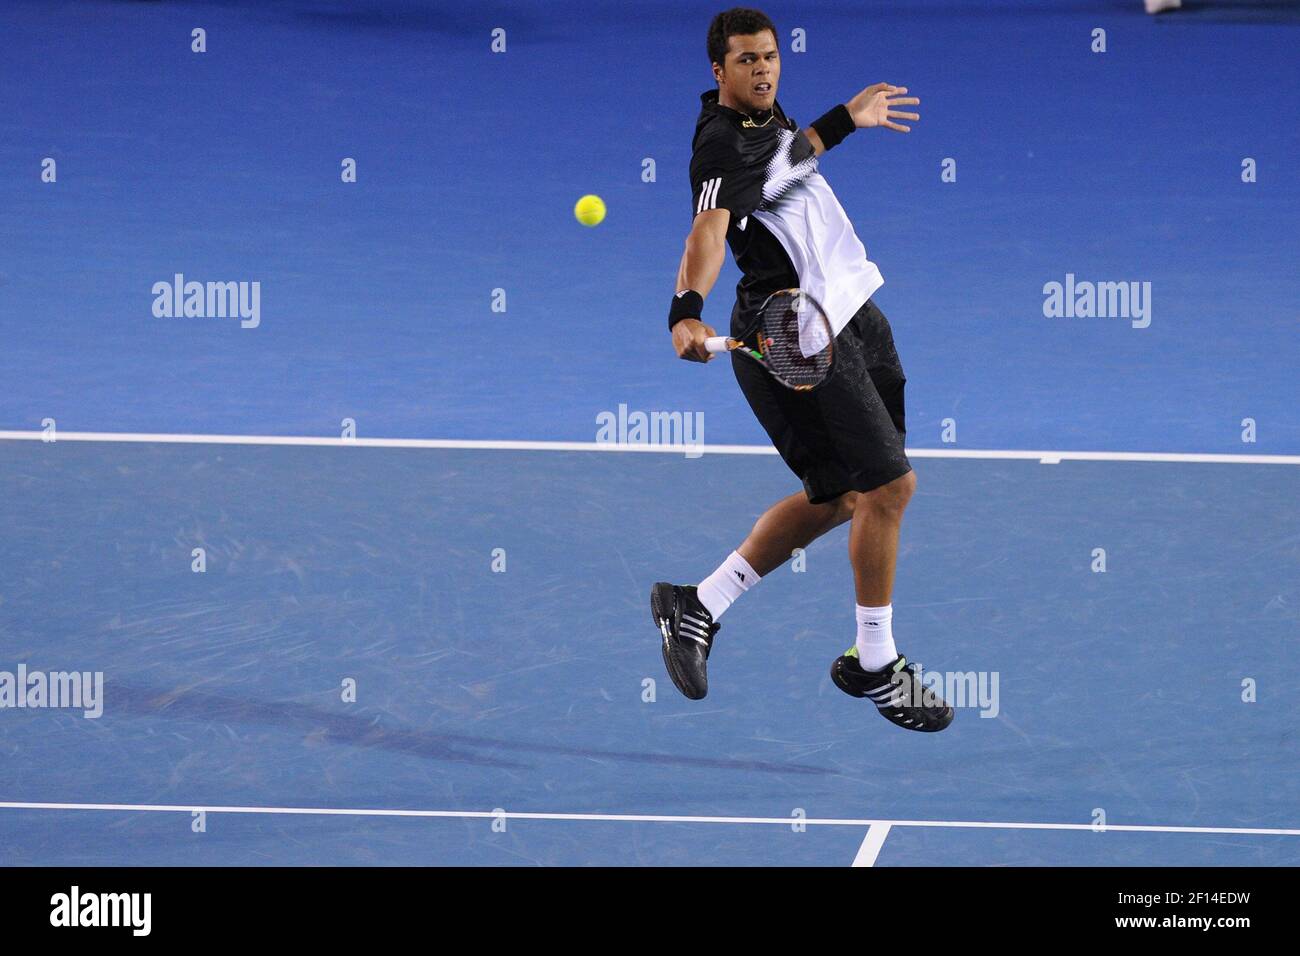 France's Jo-Wilfried Tsonga hits a return to Switzerland's Roger Federer  during their quarterfinal match at the Australian Open tennis championship  in Melbourne, Australia, Wednesday, Jan. 23, 2013.(AP Photo/Andrew  Brownbill Stock Photo -